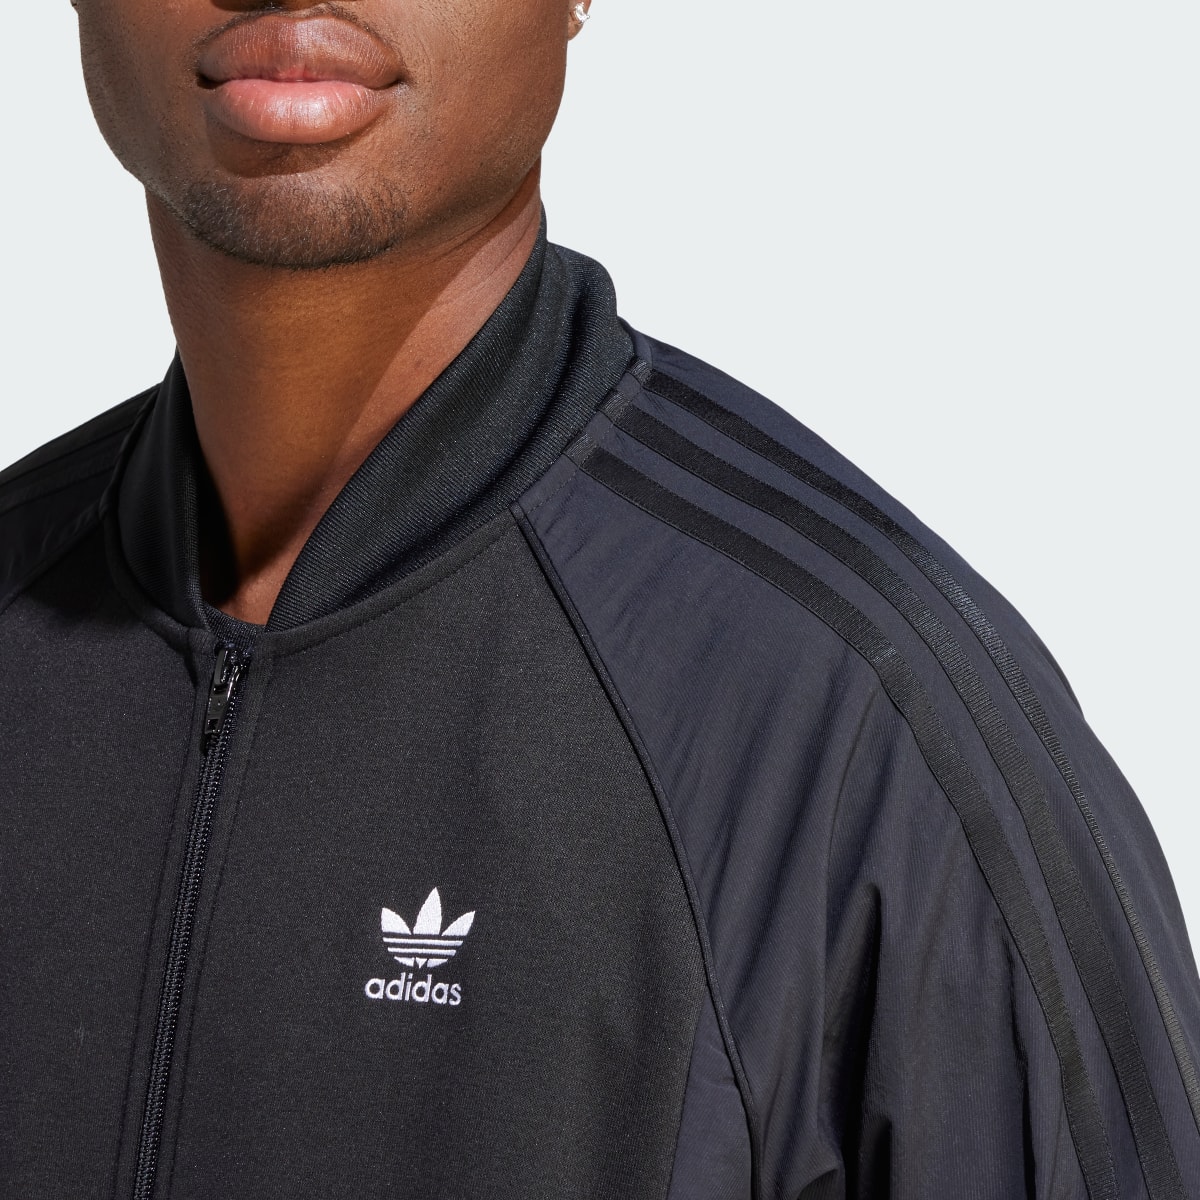 Adidas Adicolor Re-Pro SST Material Mix Track Top. 6